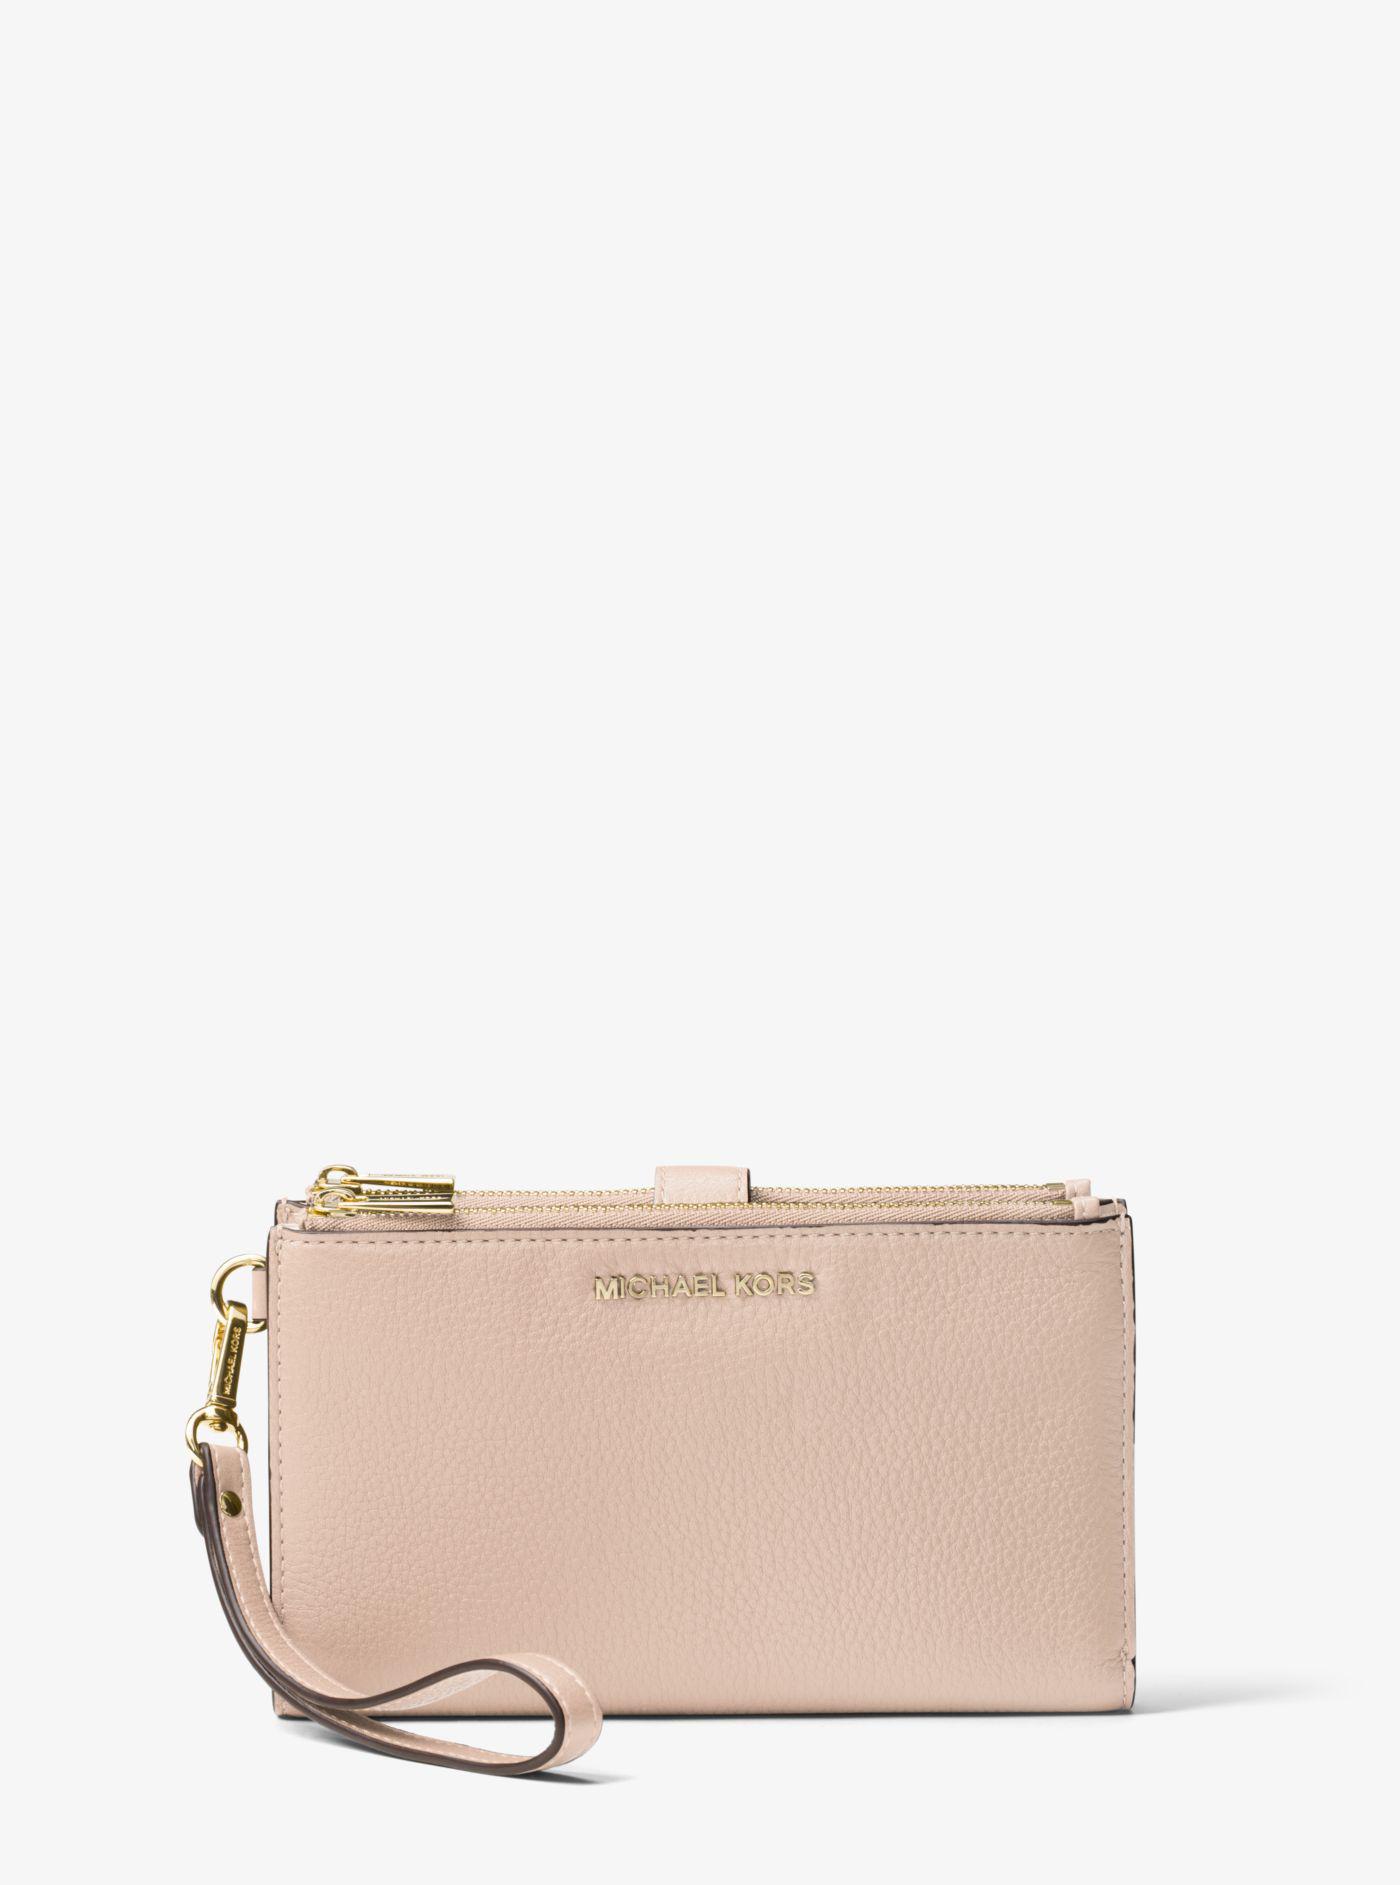 Michael Kors Adele Leather Smartphone Wallet in Soft Pink (Pink 